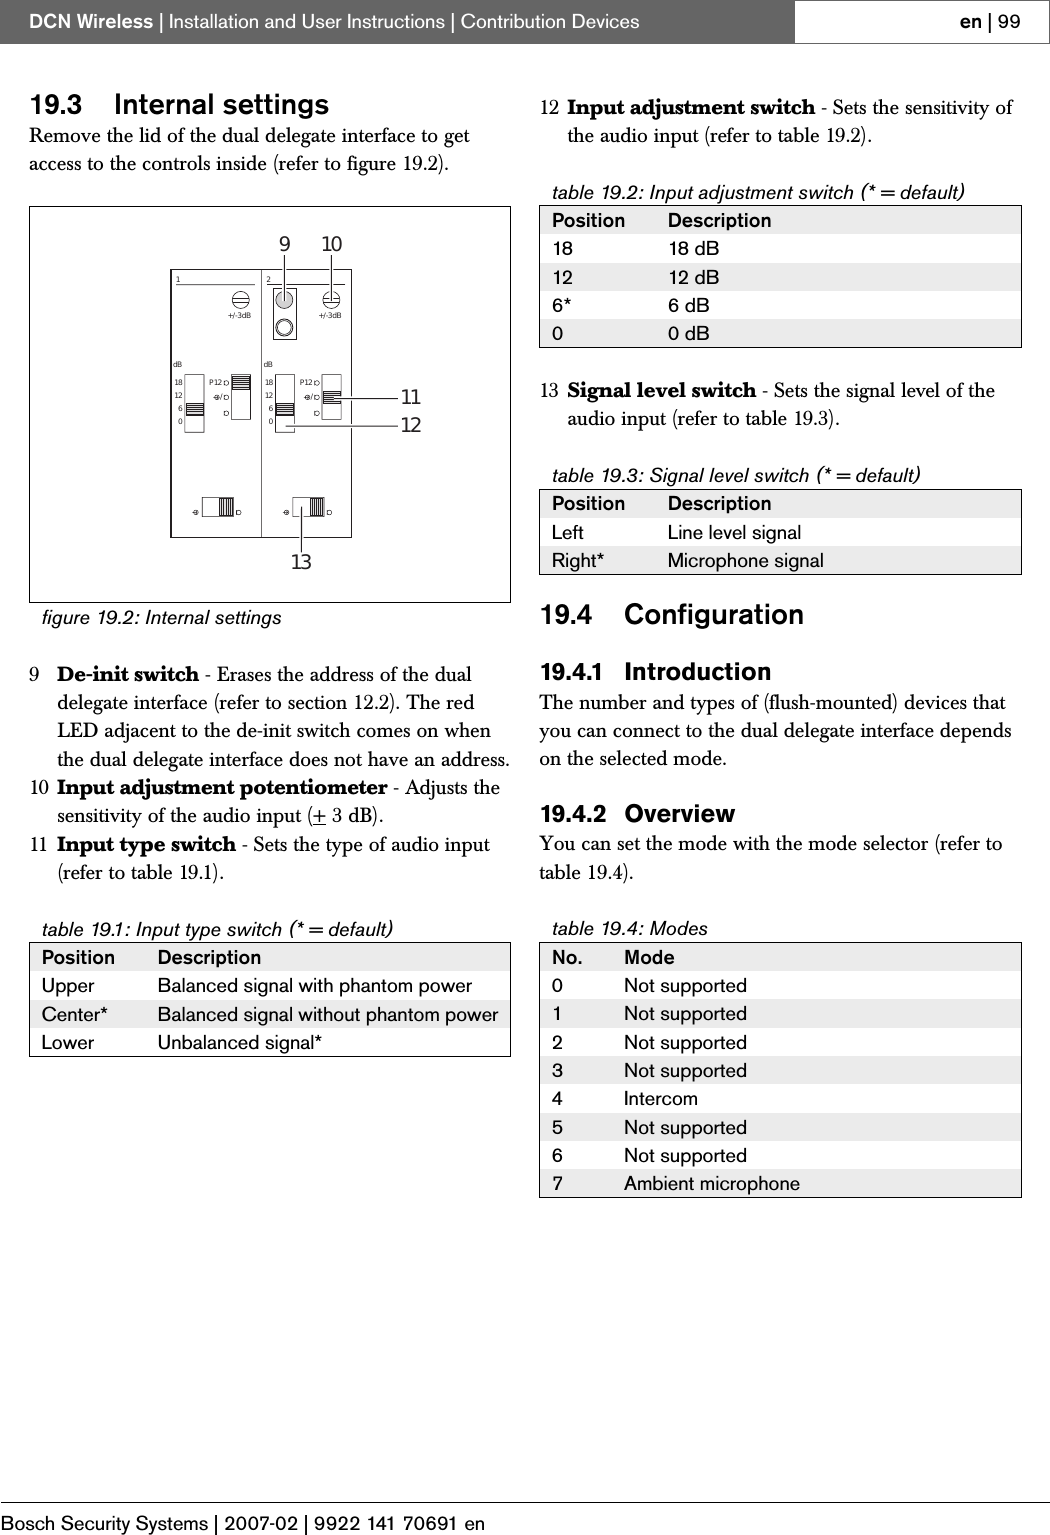 Page 70 of Bosch Security Systems DCNWAP Wireless Access Point User Manual Part 2